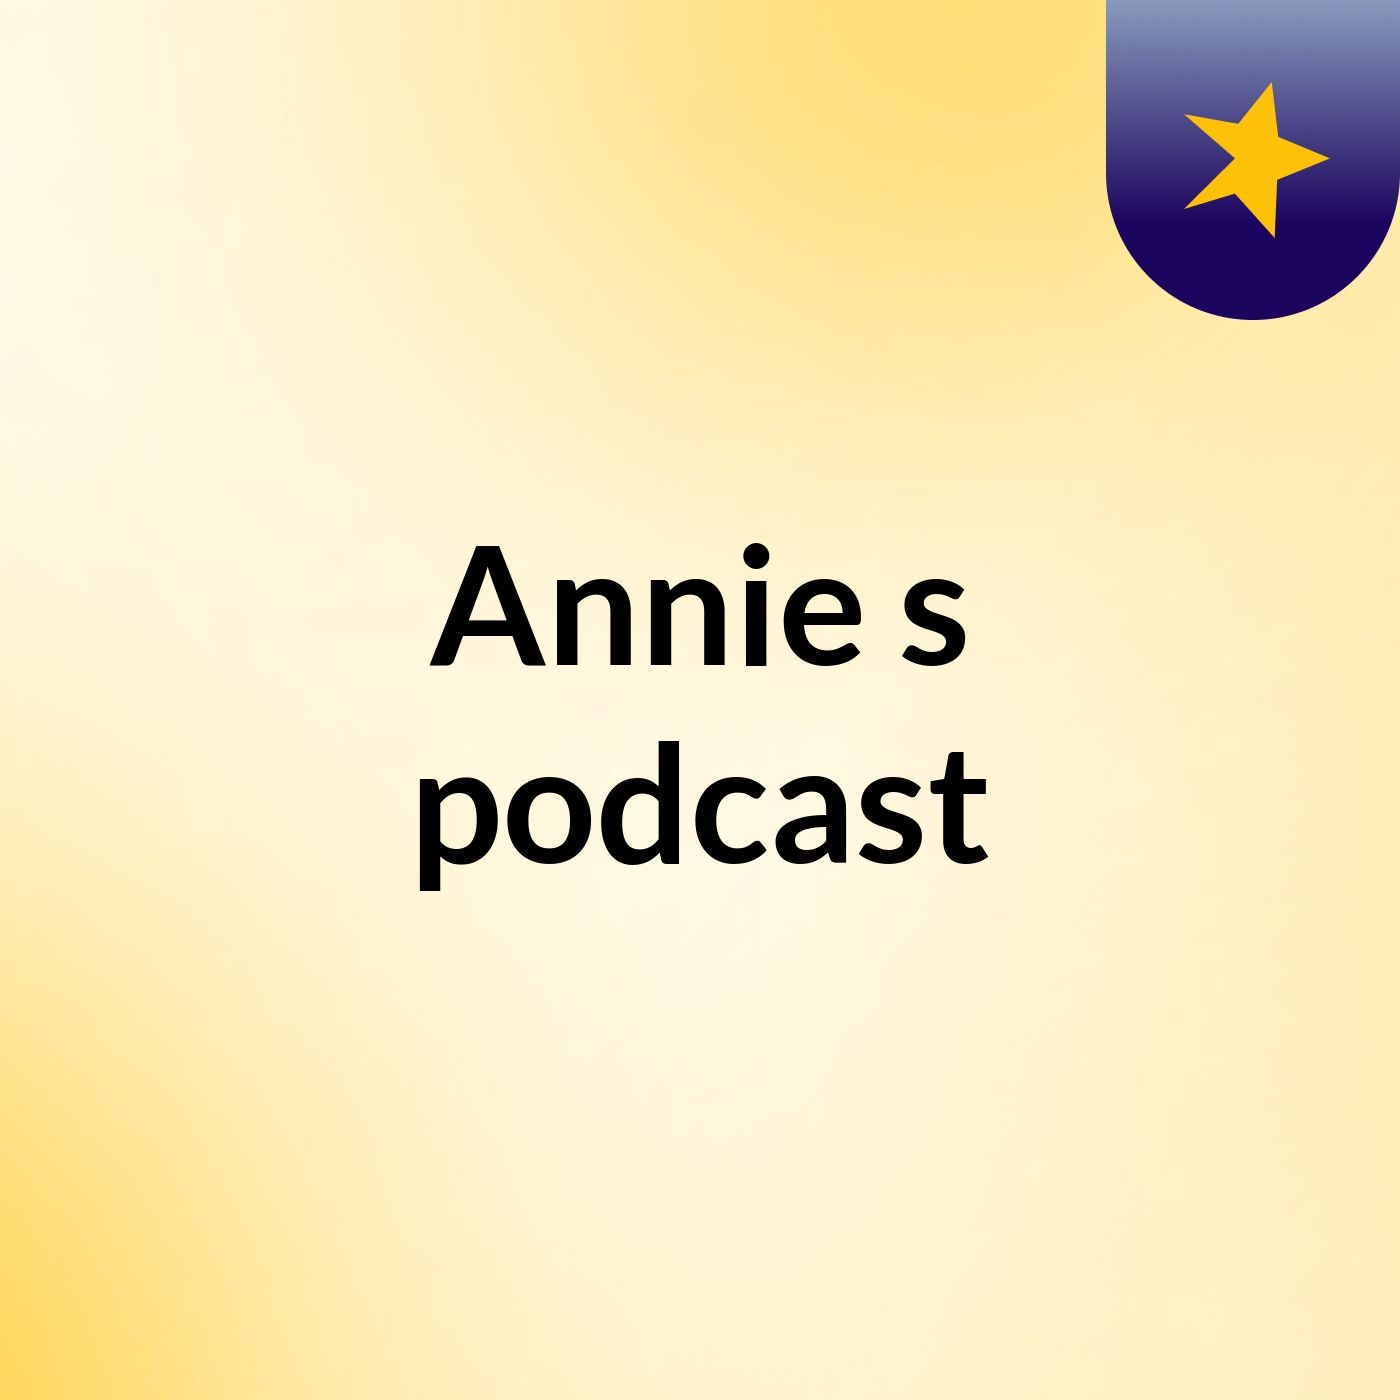 Annie's podcast